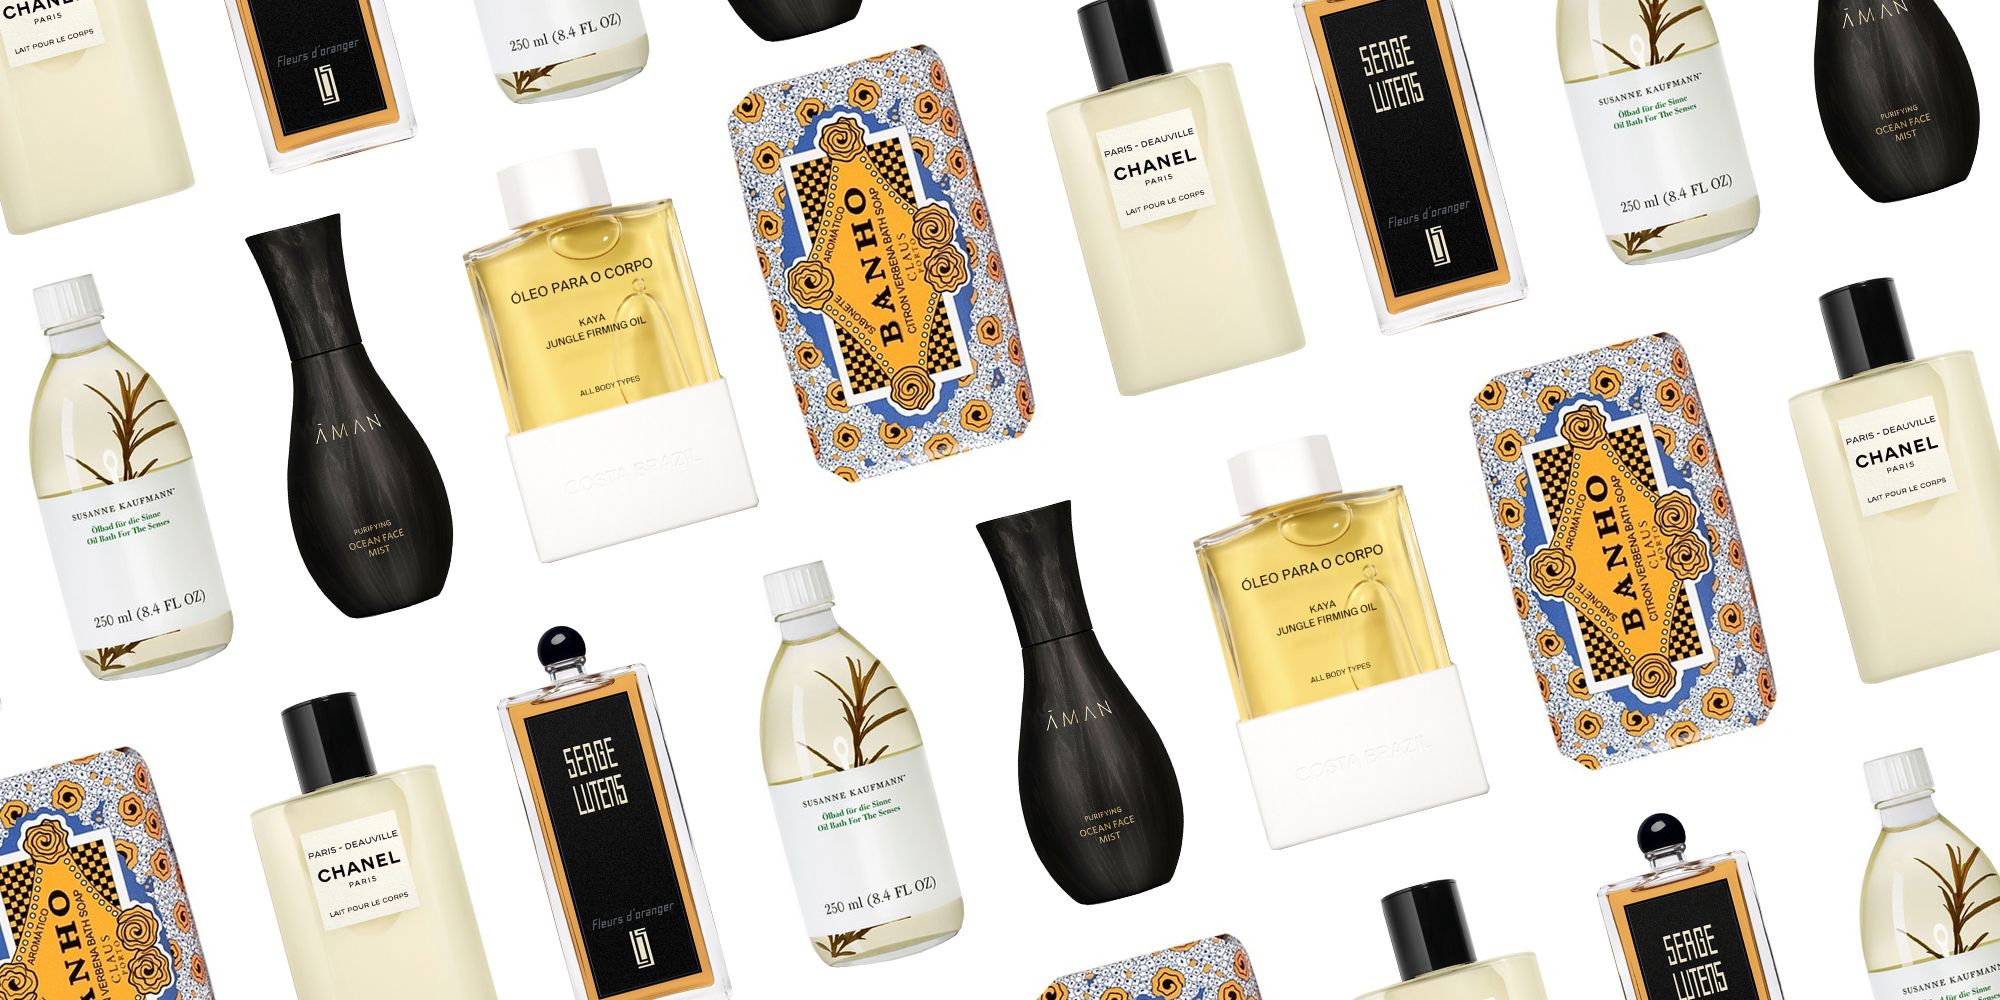 7 Different Fragrances That Let You Travel Without Actually Going Anywhere